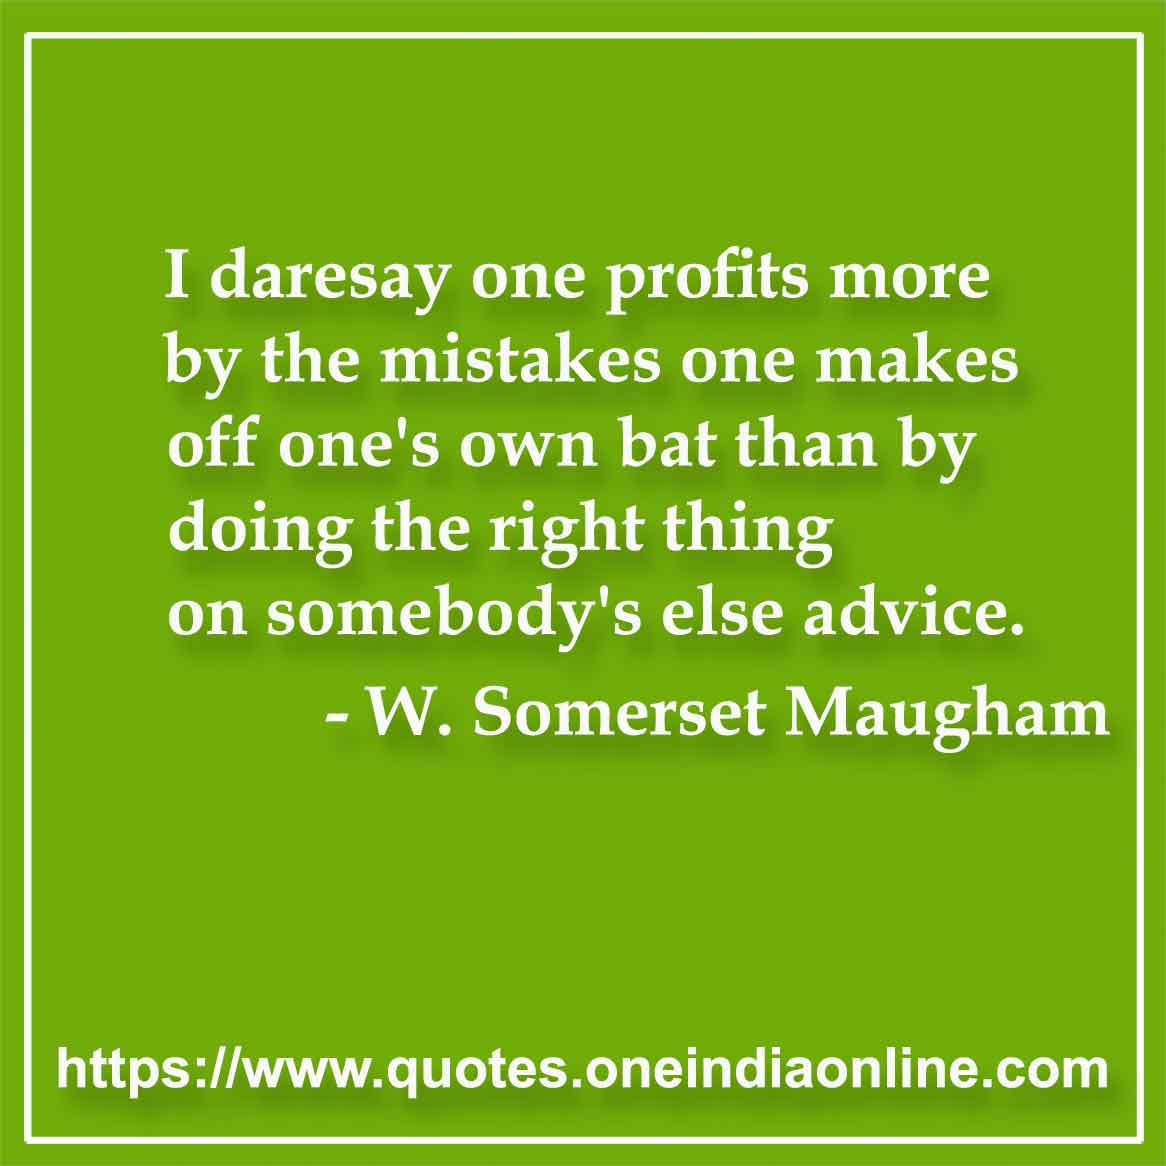 I daresay one profits more by the mistakes one makes off one's own bat than by doing the right thing on somebody's else advice.

- W. Somerset Maugham Quotes